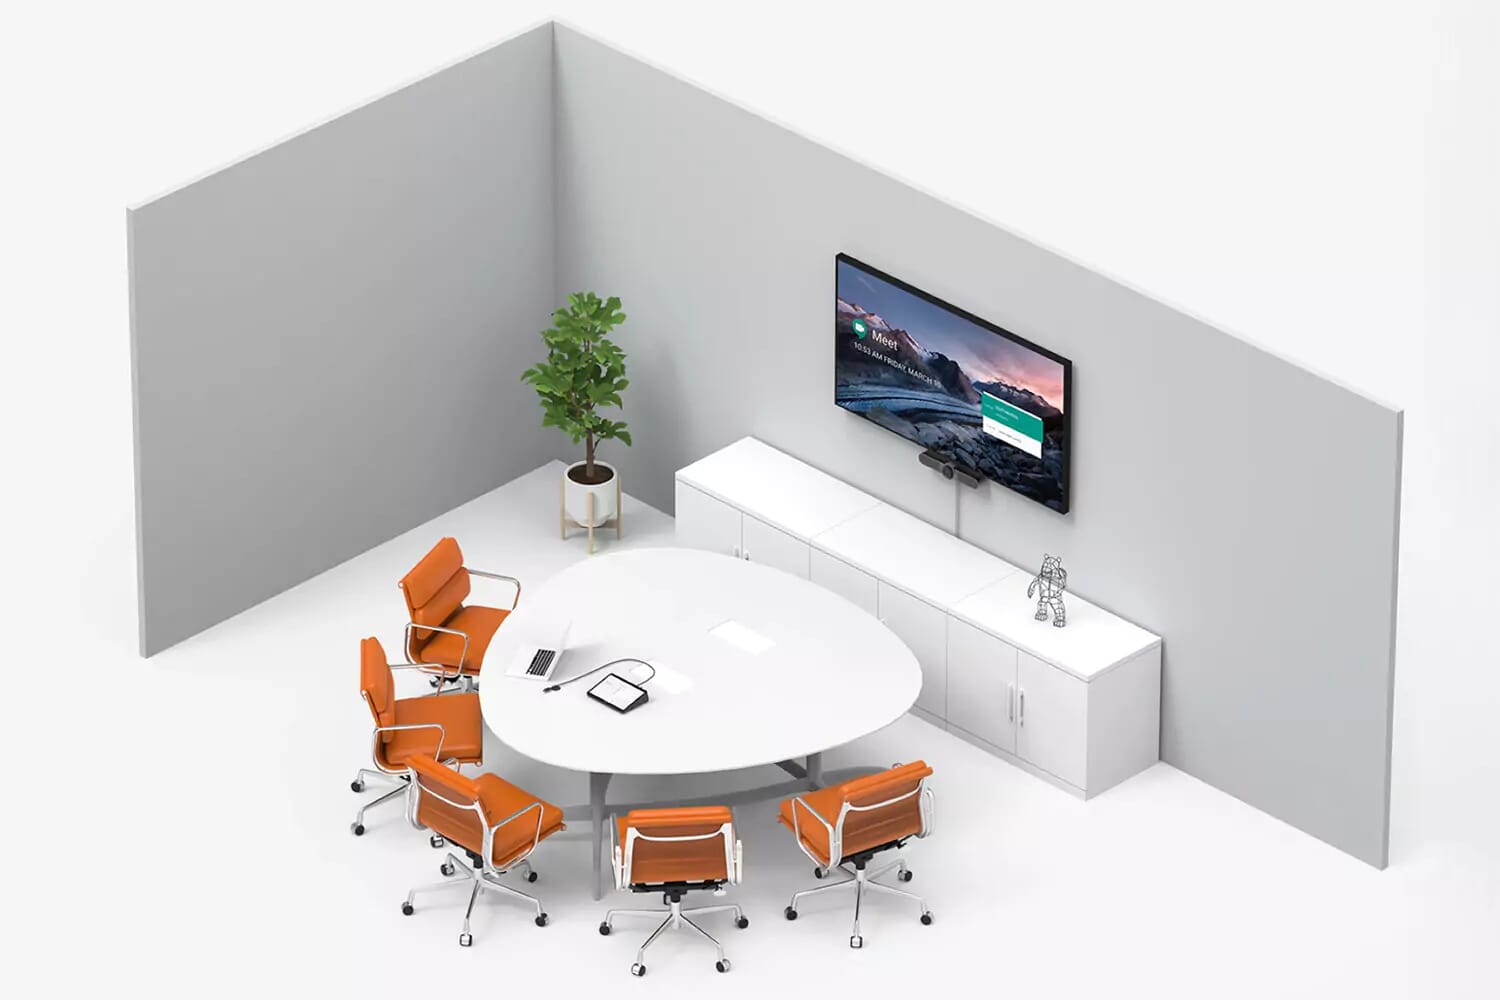 Small meeting room solutions